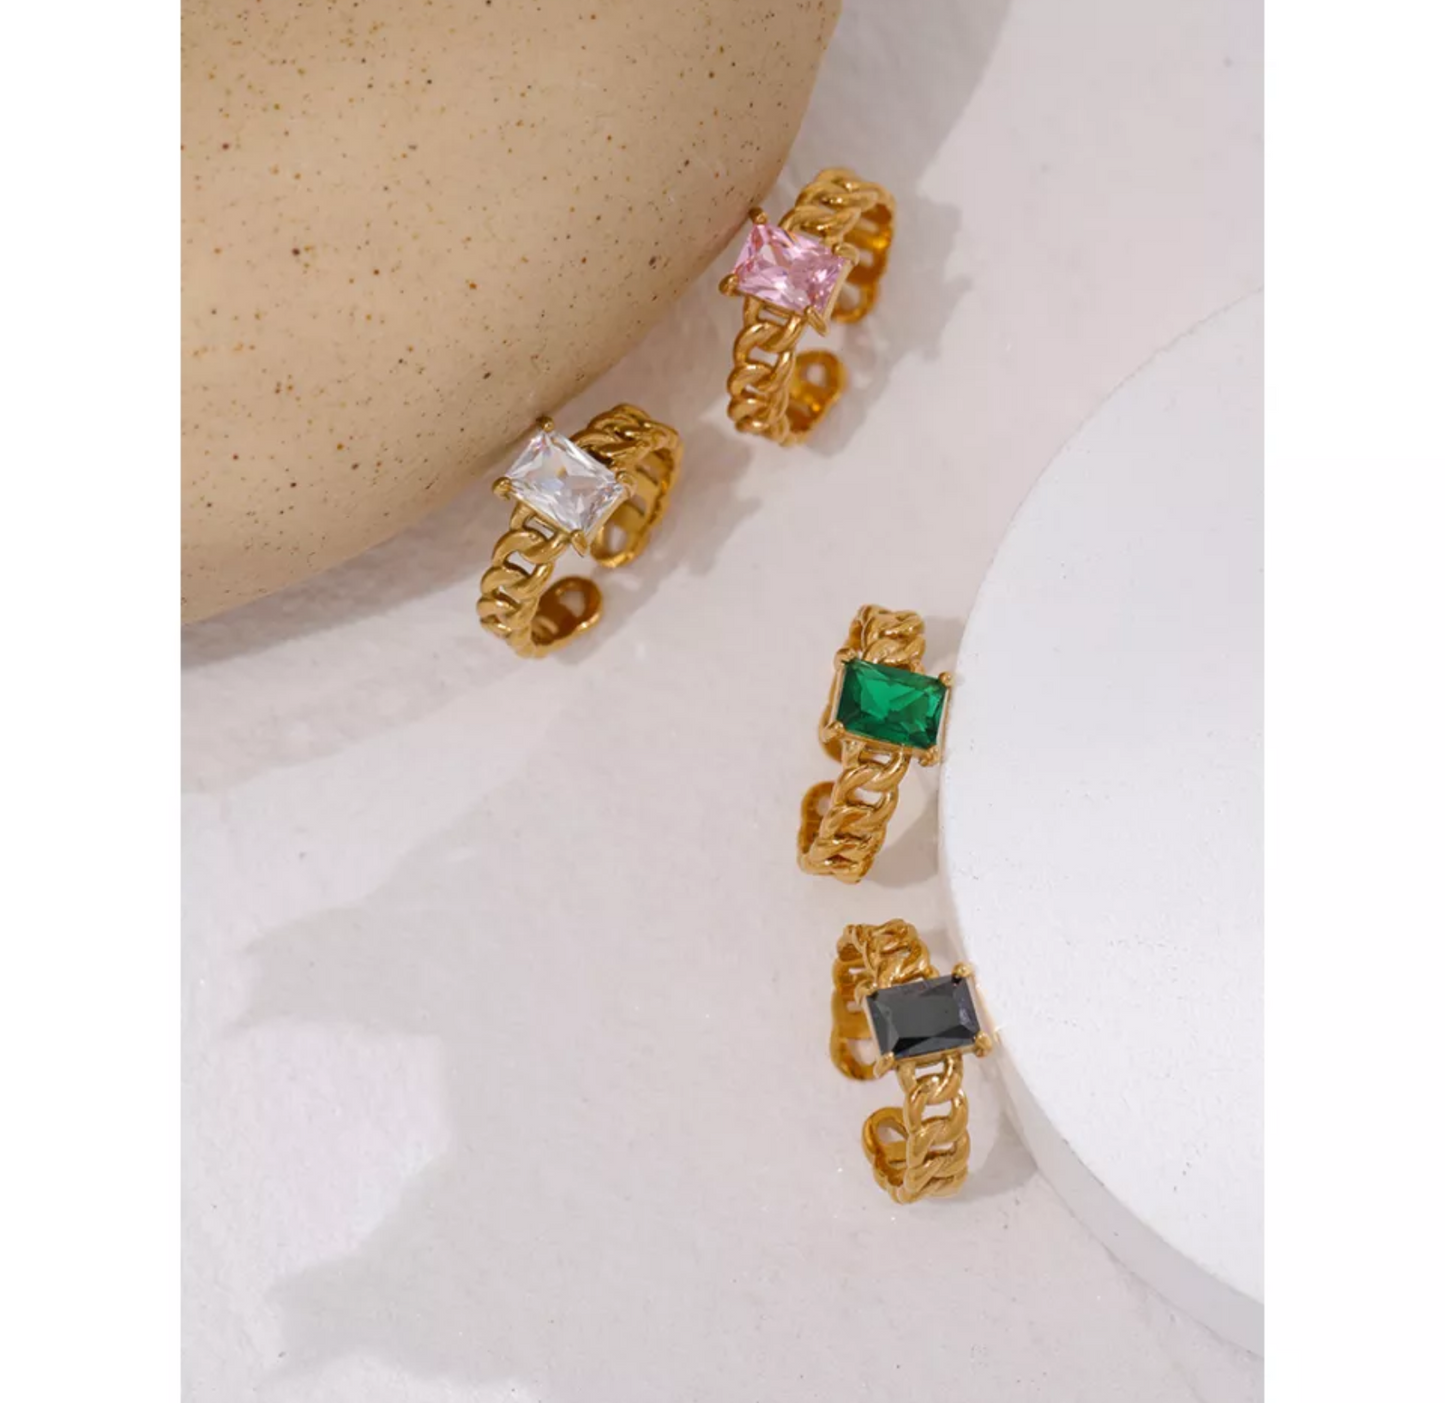 WILLOW - Large Gemstones Rings - Eid Collection - PREORDER